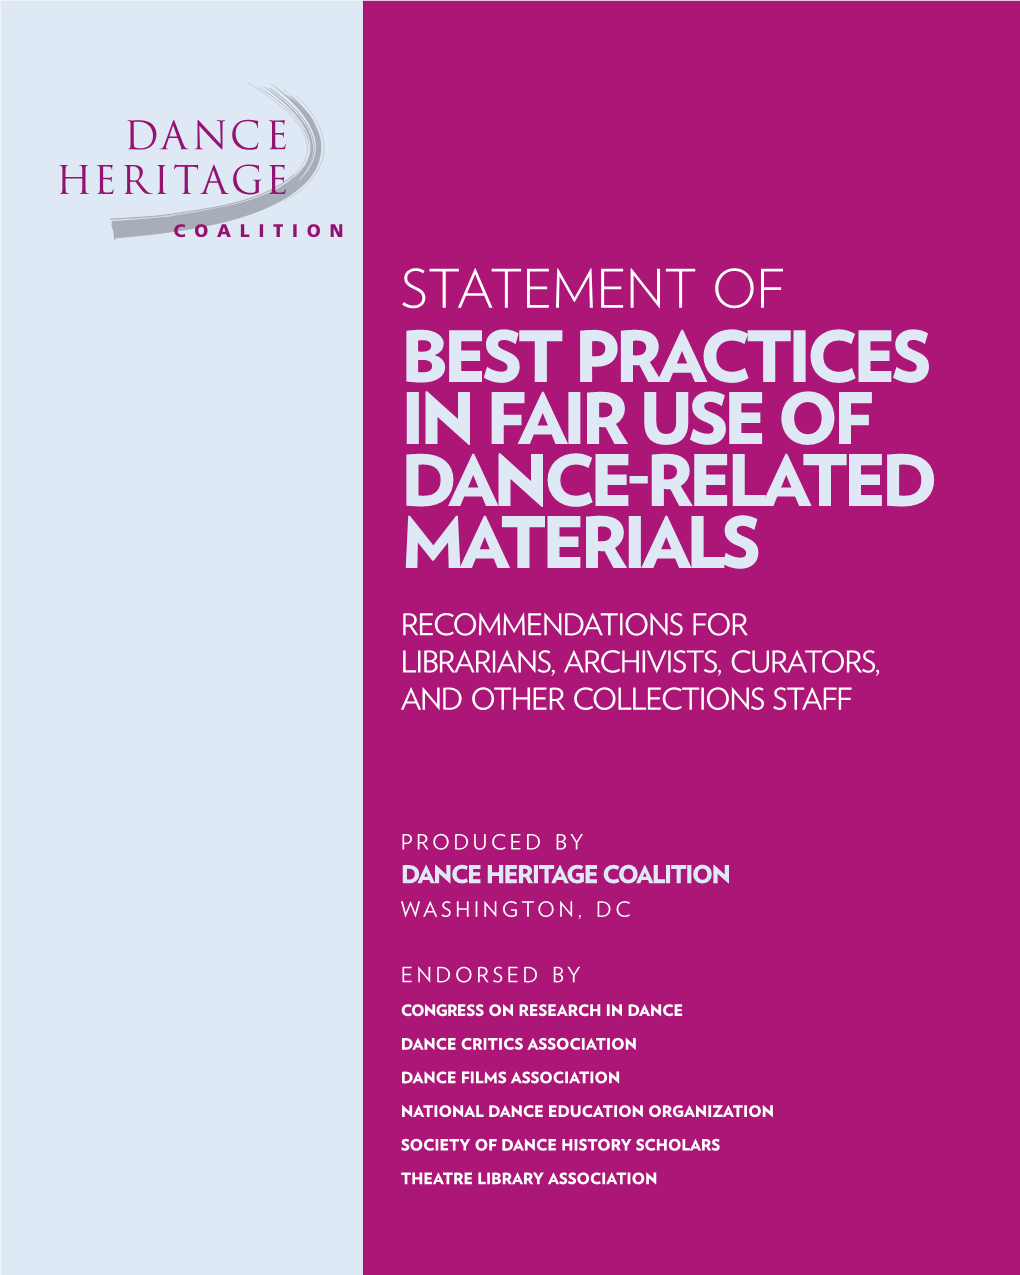 Best Practices in Fair Use of Dance-Related Materials Recommendations for Librarians, Archivists, Curators, and Other Collections Staff